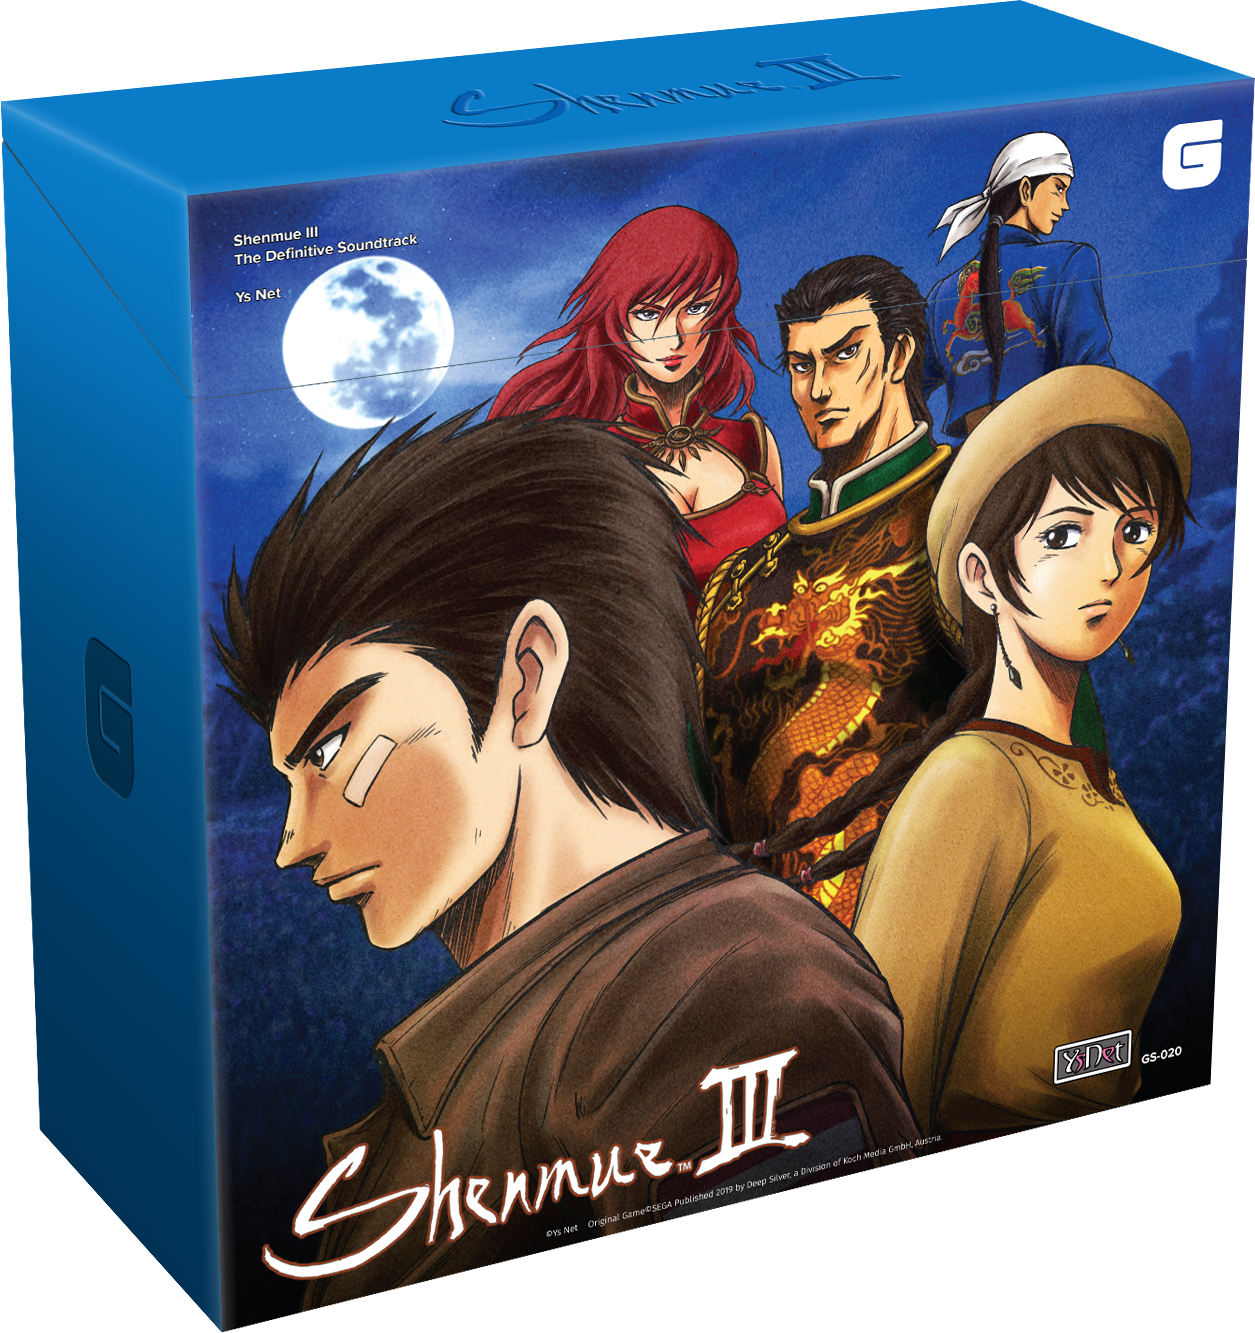 Shenmue III - The Definitive Soundtrack Complete Collection - Limited